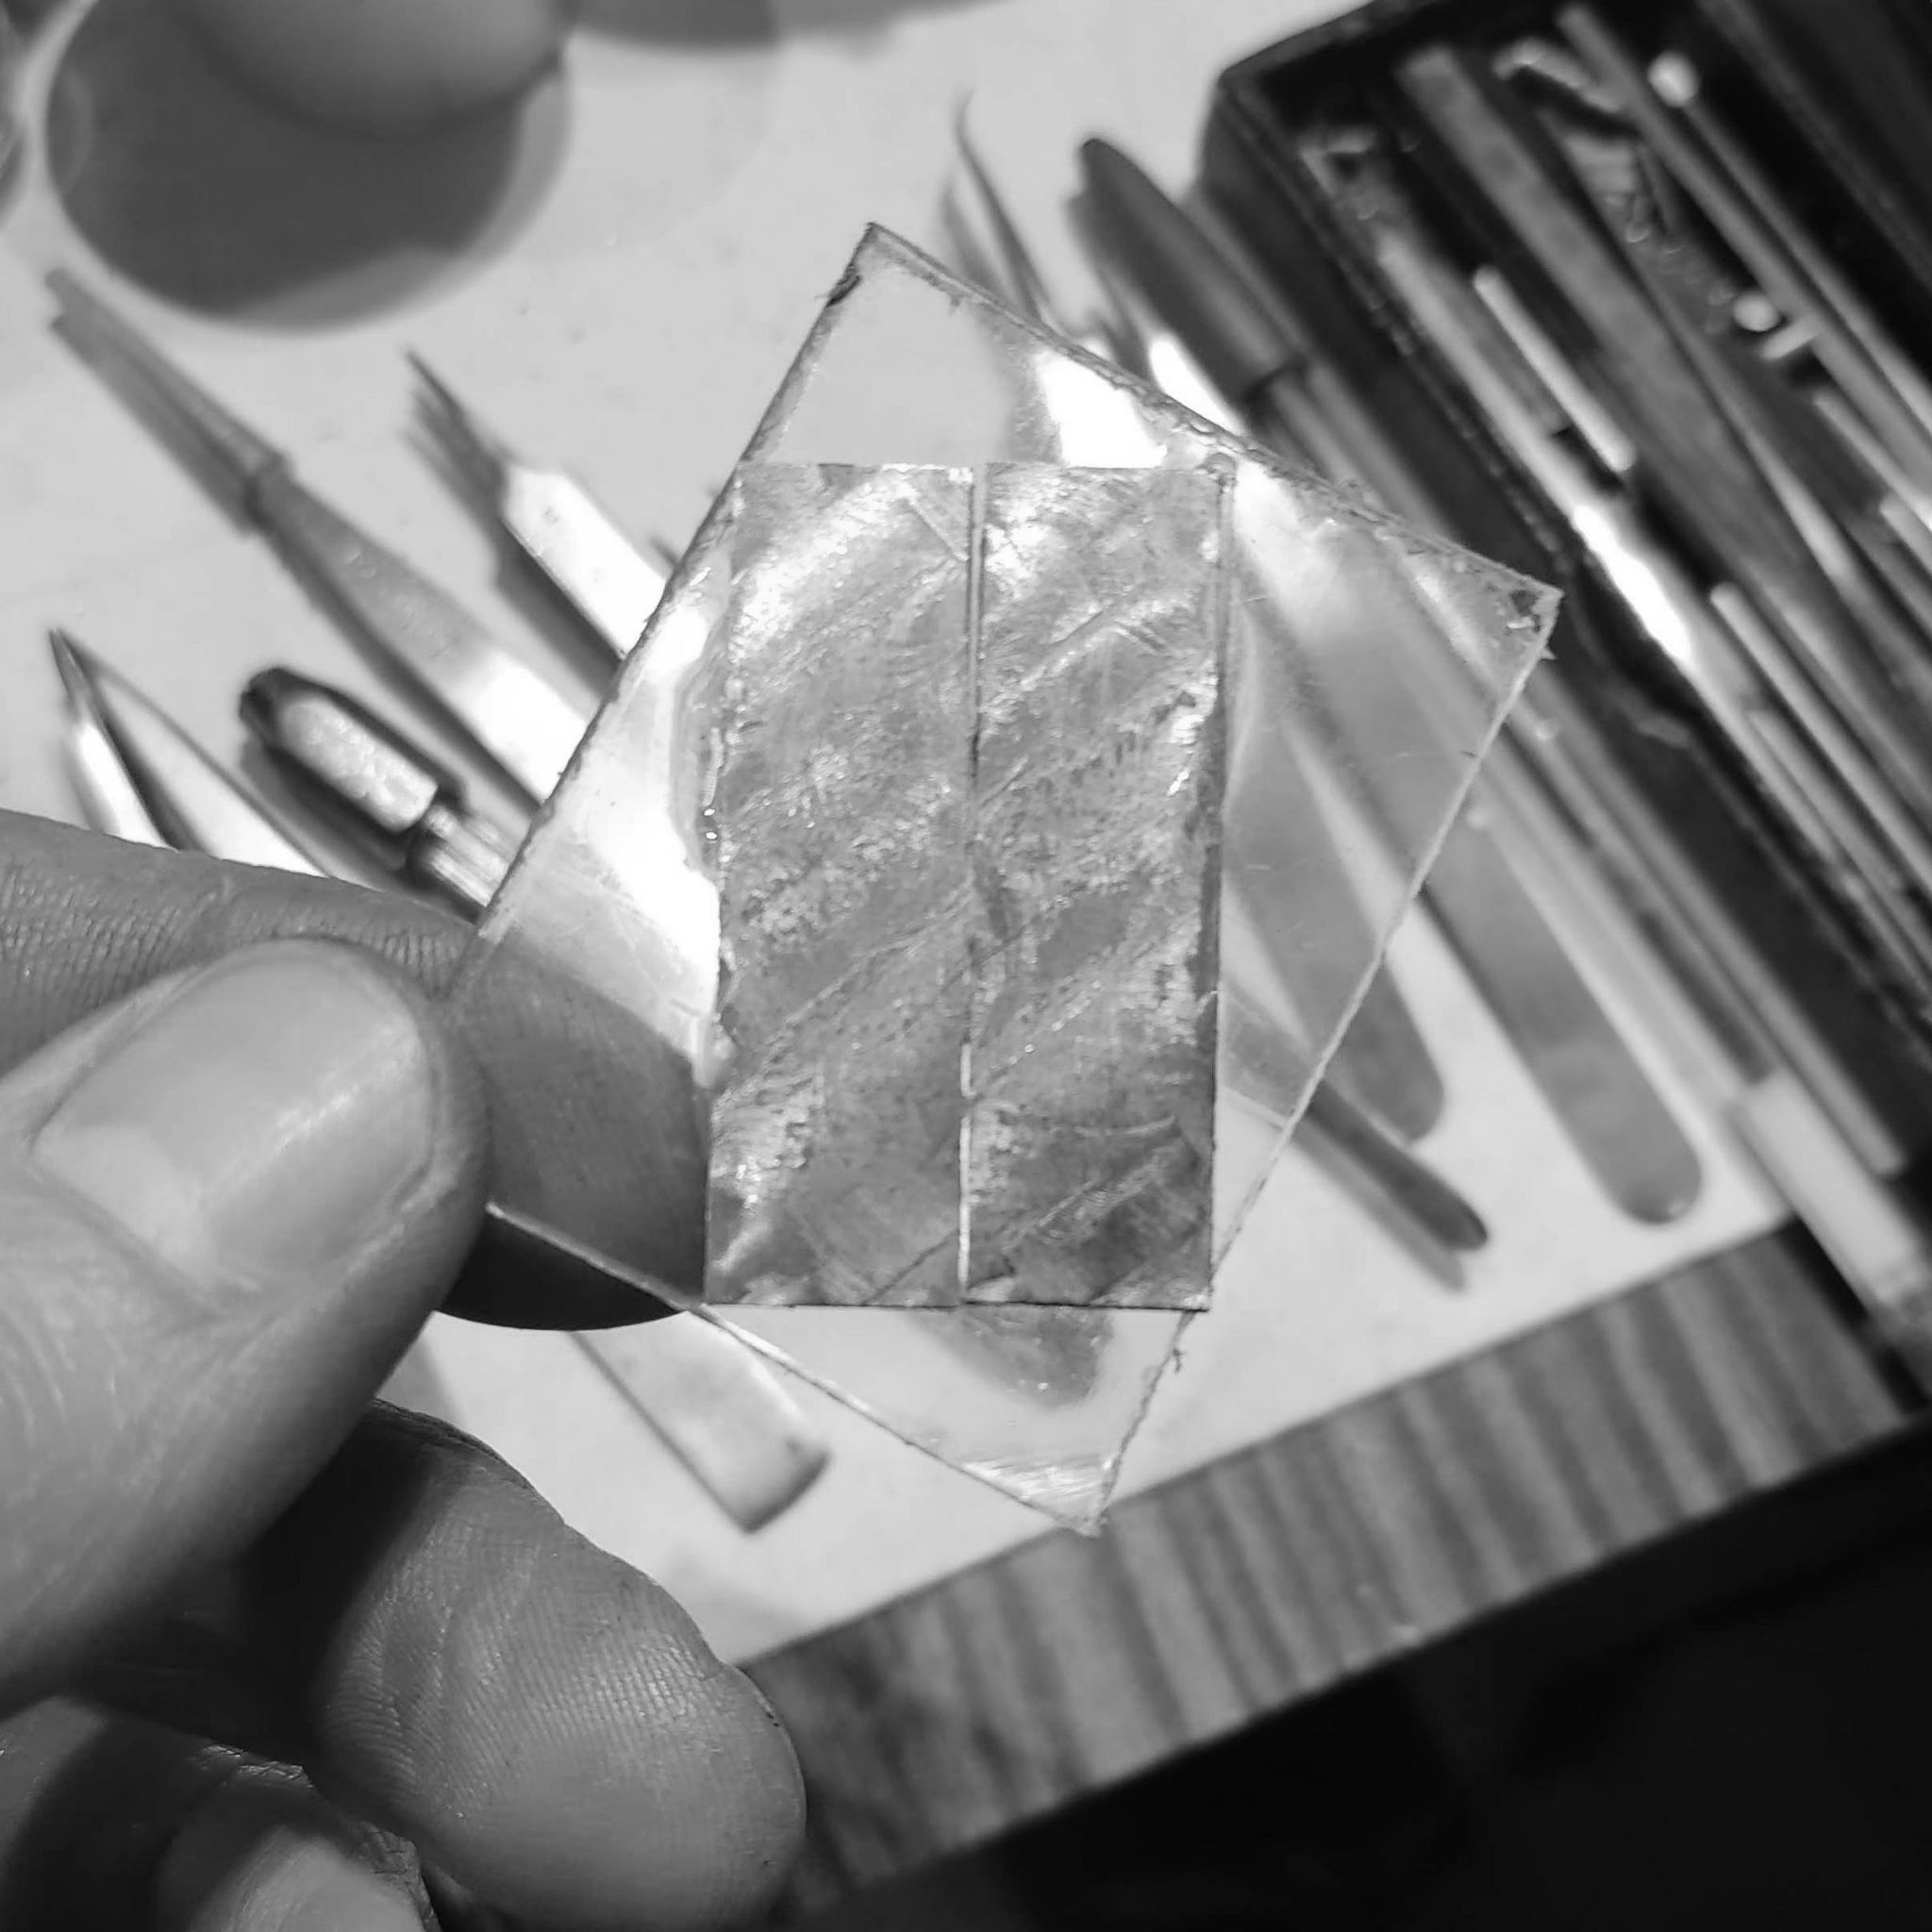 I cemented the pieces on a piece of acrylic. Acrylic and contact cement is widely used in the watch industry for work holding, as it bonds very well with steel, and acetone can then easily dissolve it.